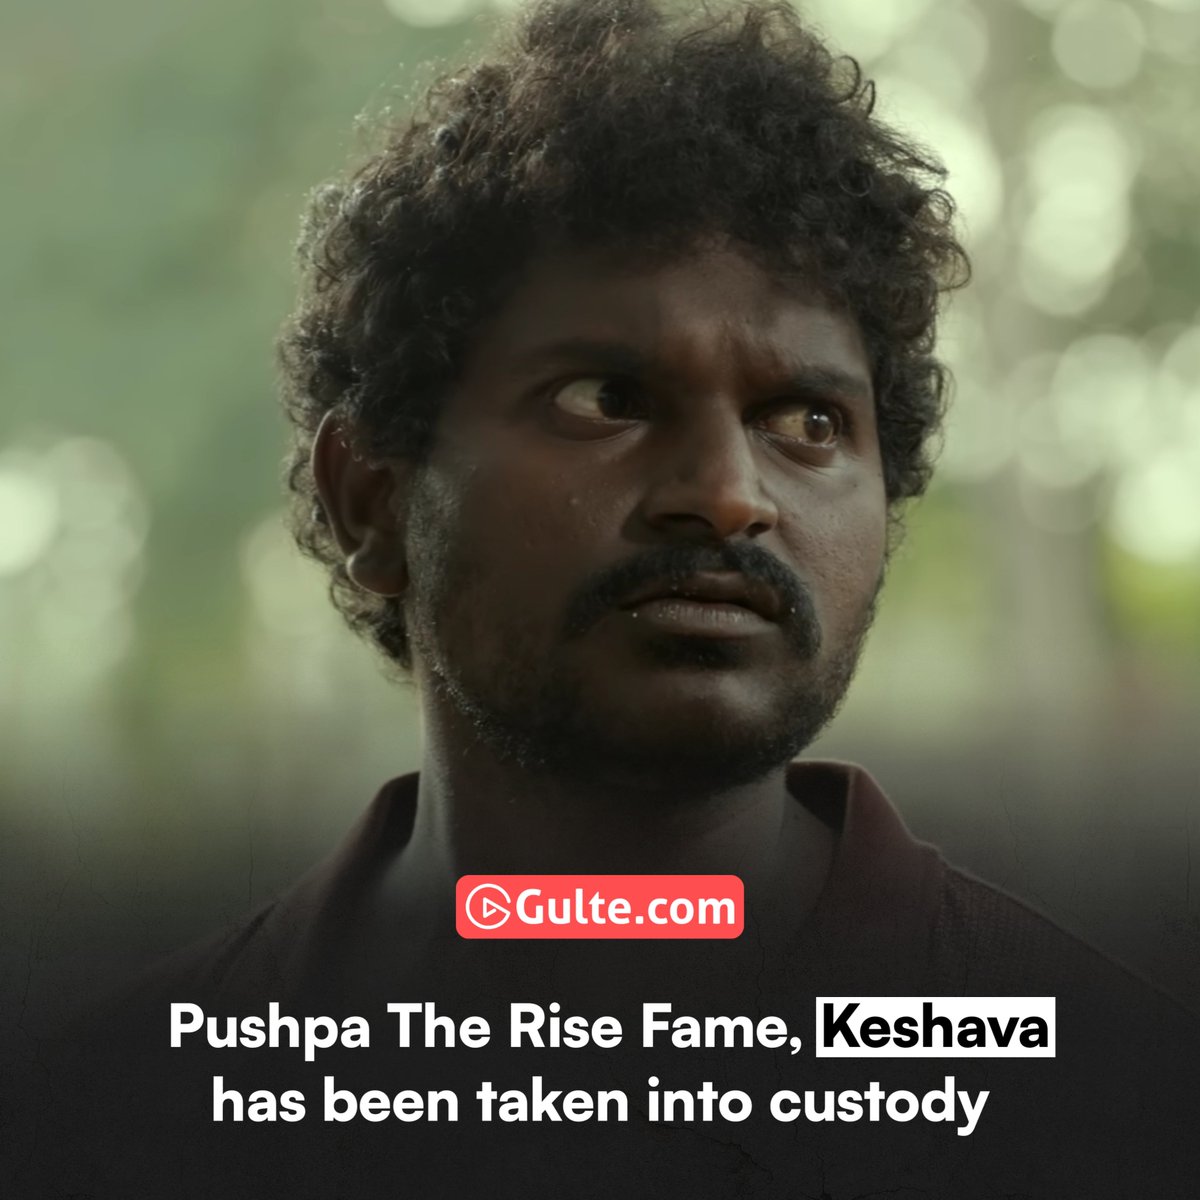 #Jagadeesh, the actor who played the role of Kesava in #Pushpa, has been arrested by Punjagutta Police. According to media reports, he is accused of making threats to a junior artist, which reportedly resulted in her tragic suicide.